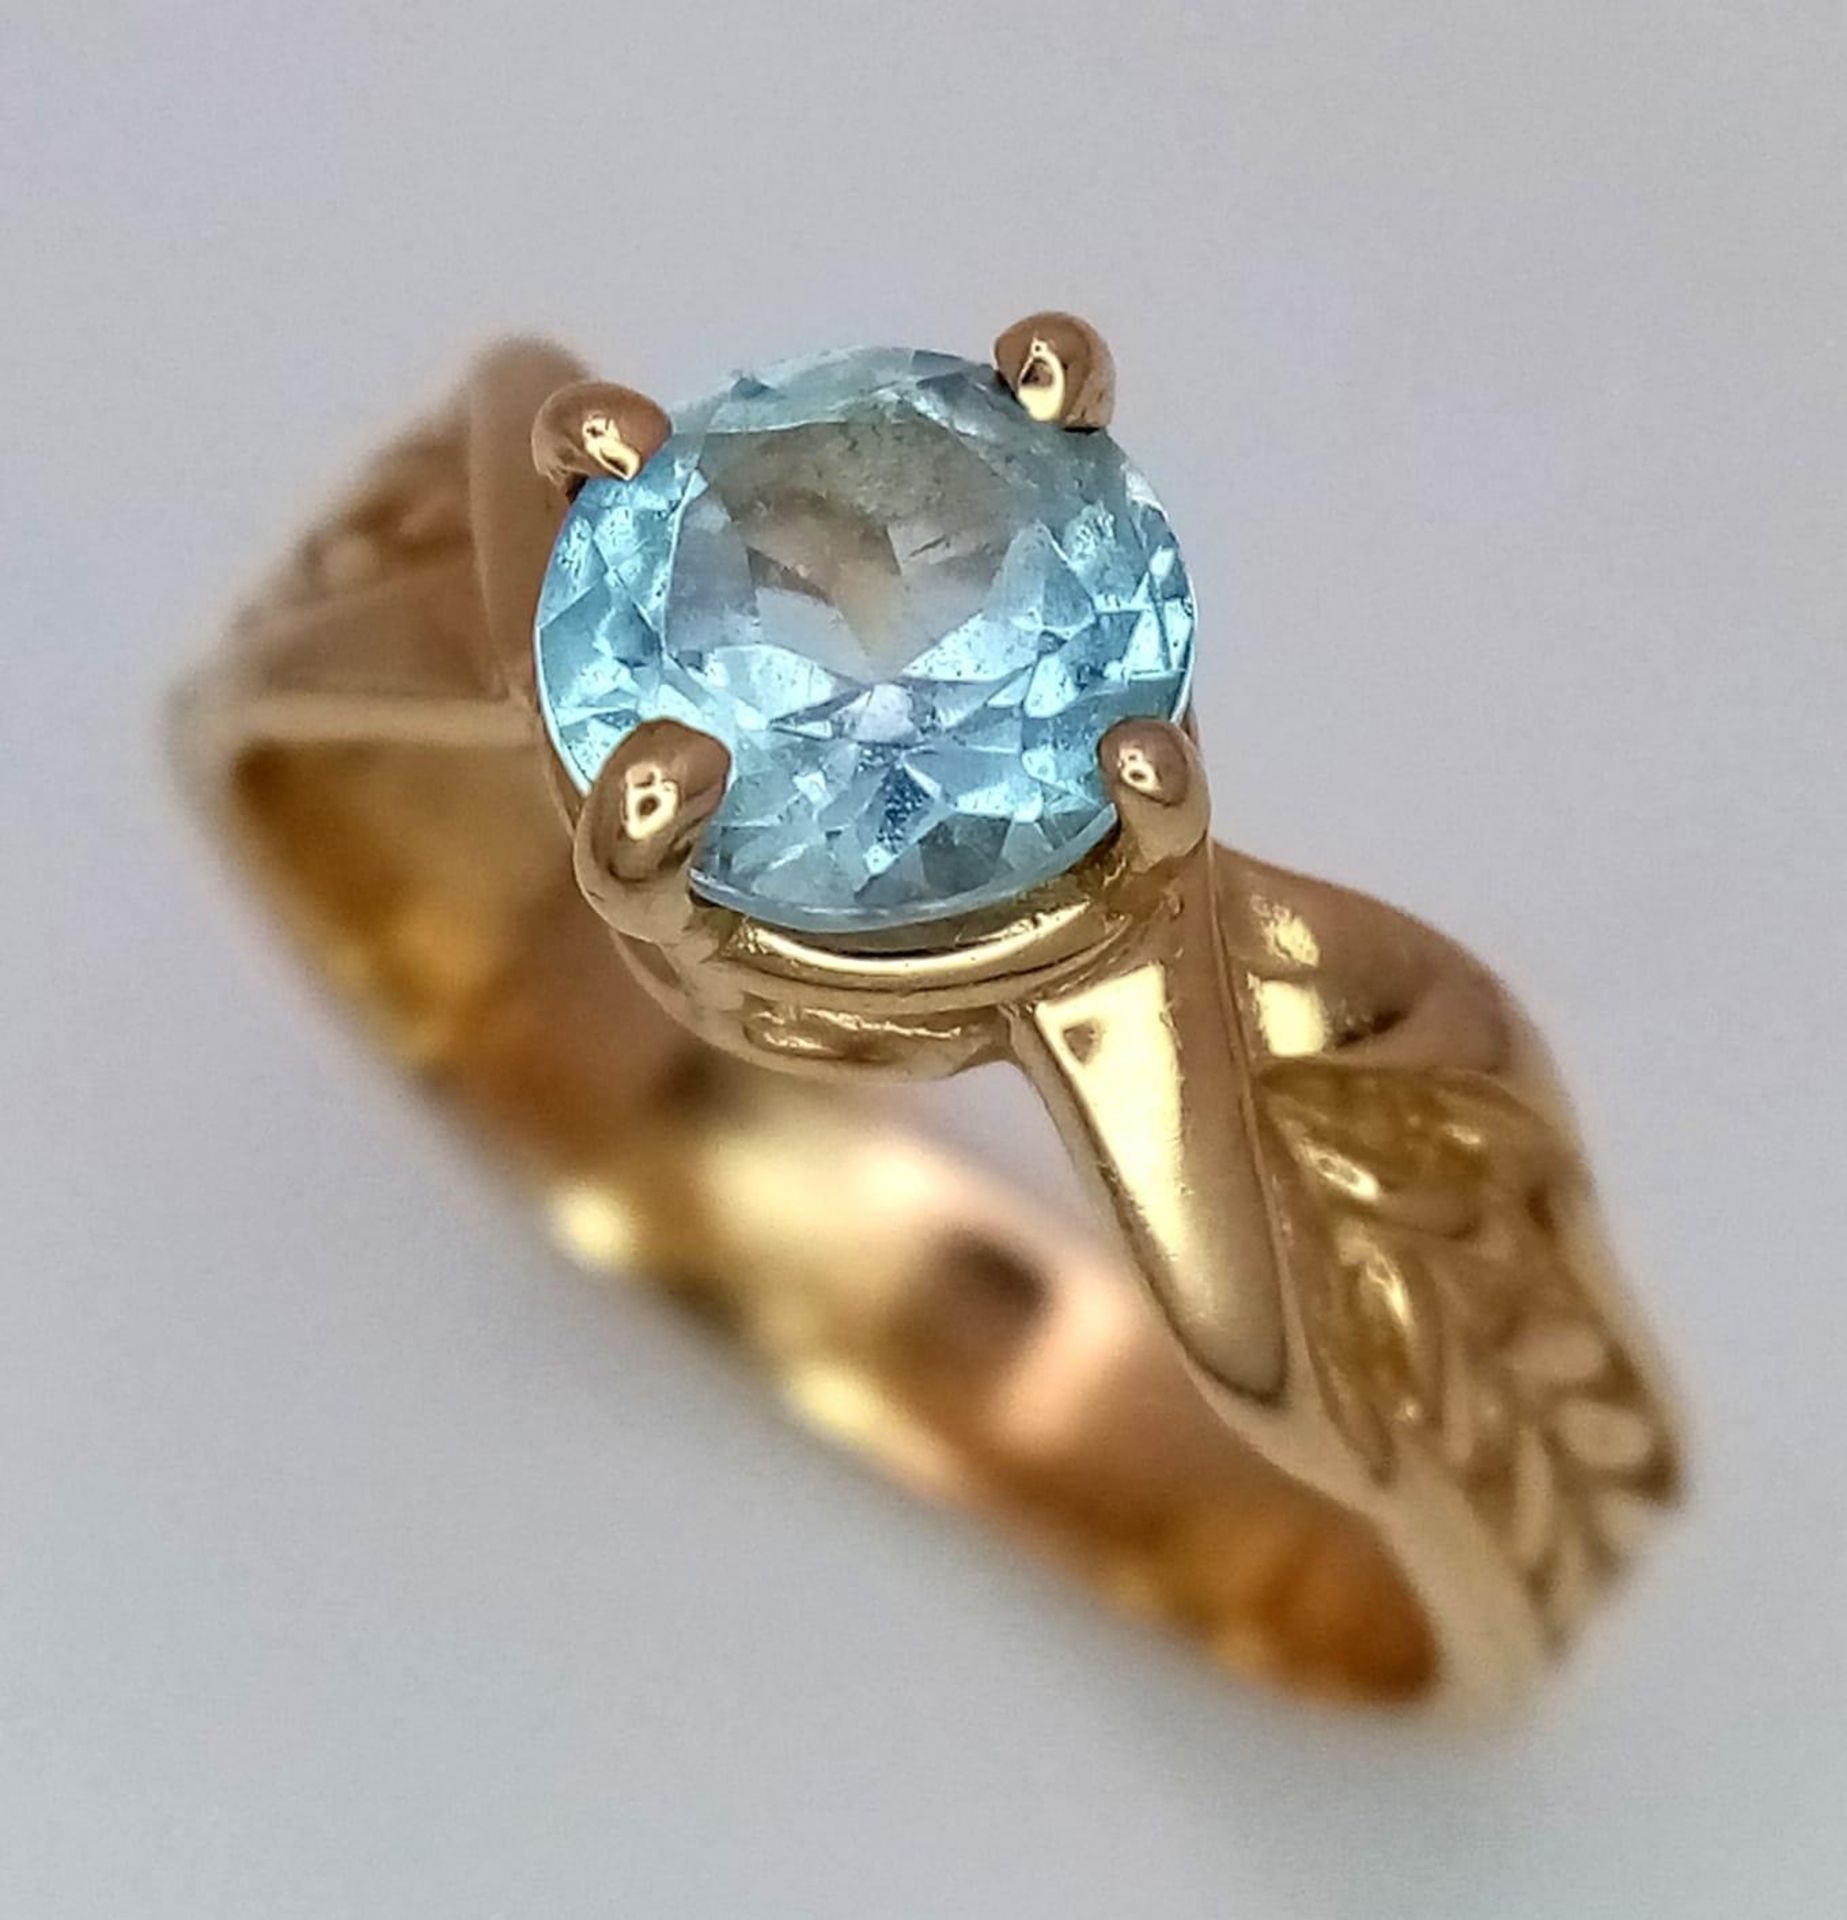 A Vintage 14K Yellow Gold Aquamarine Ring. Size K 1/2. 3.6g total weight. - Image 3 of 5